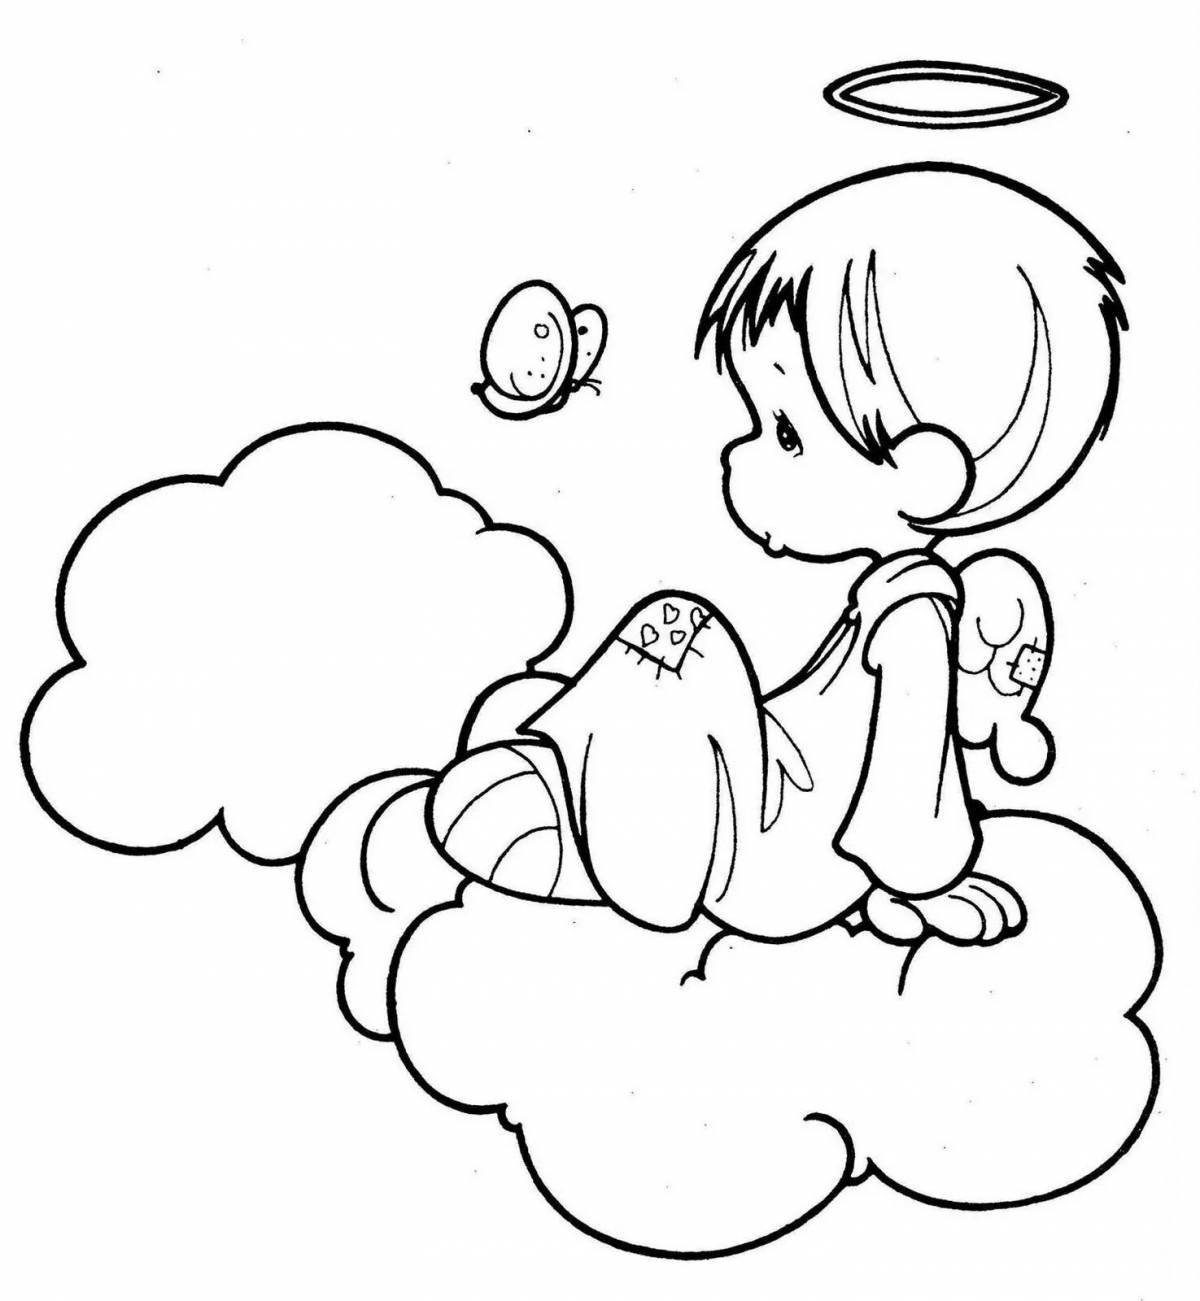 Exquisite angel coloring book for kids